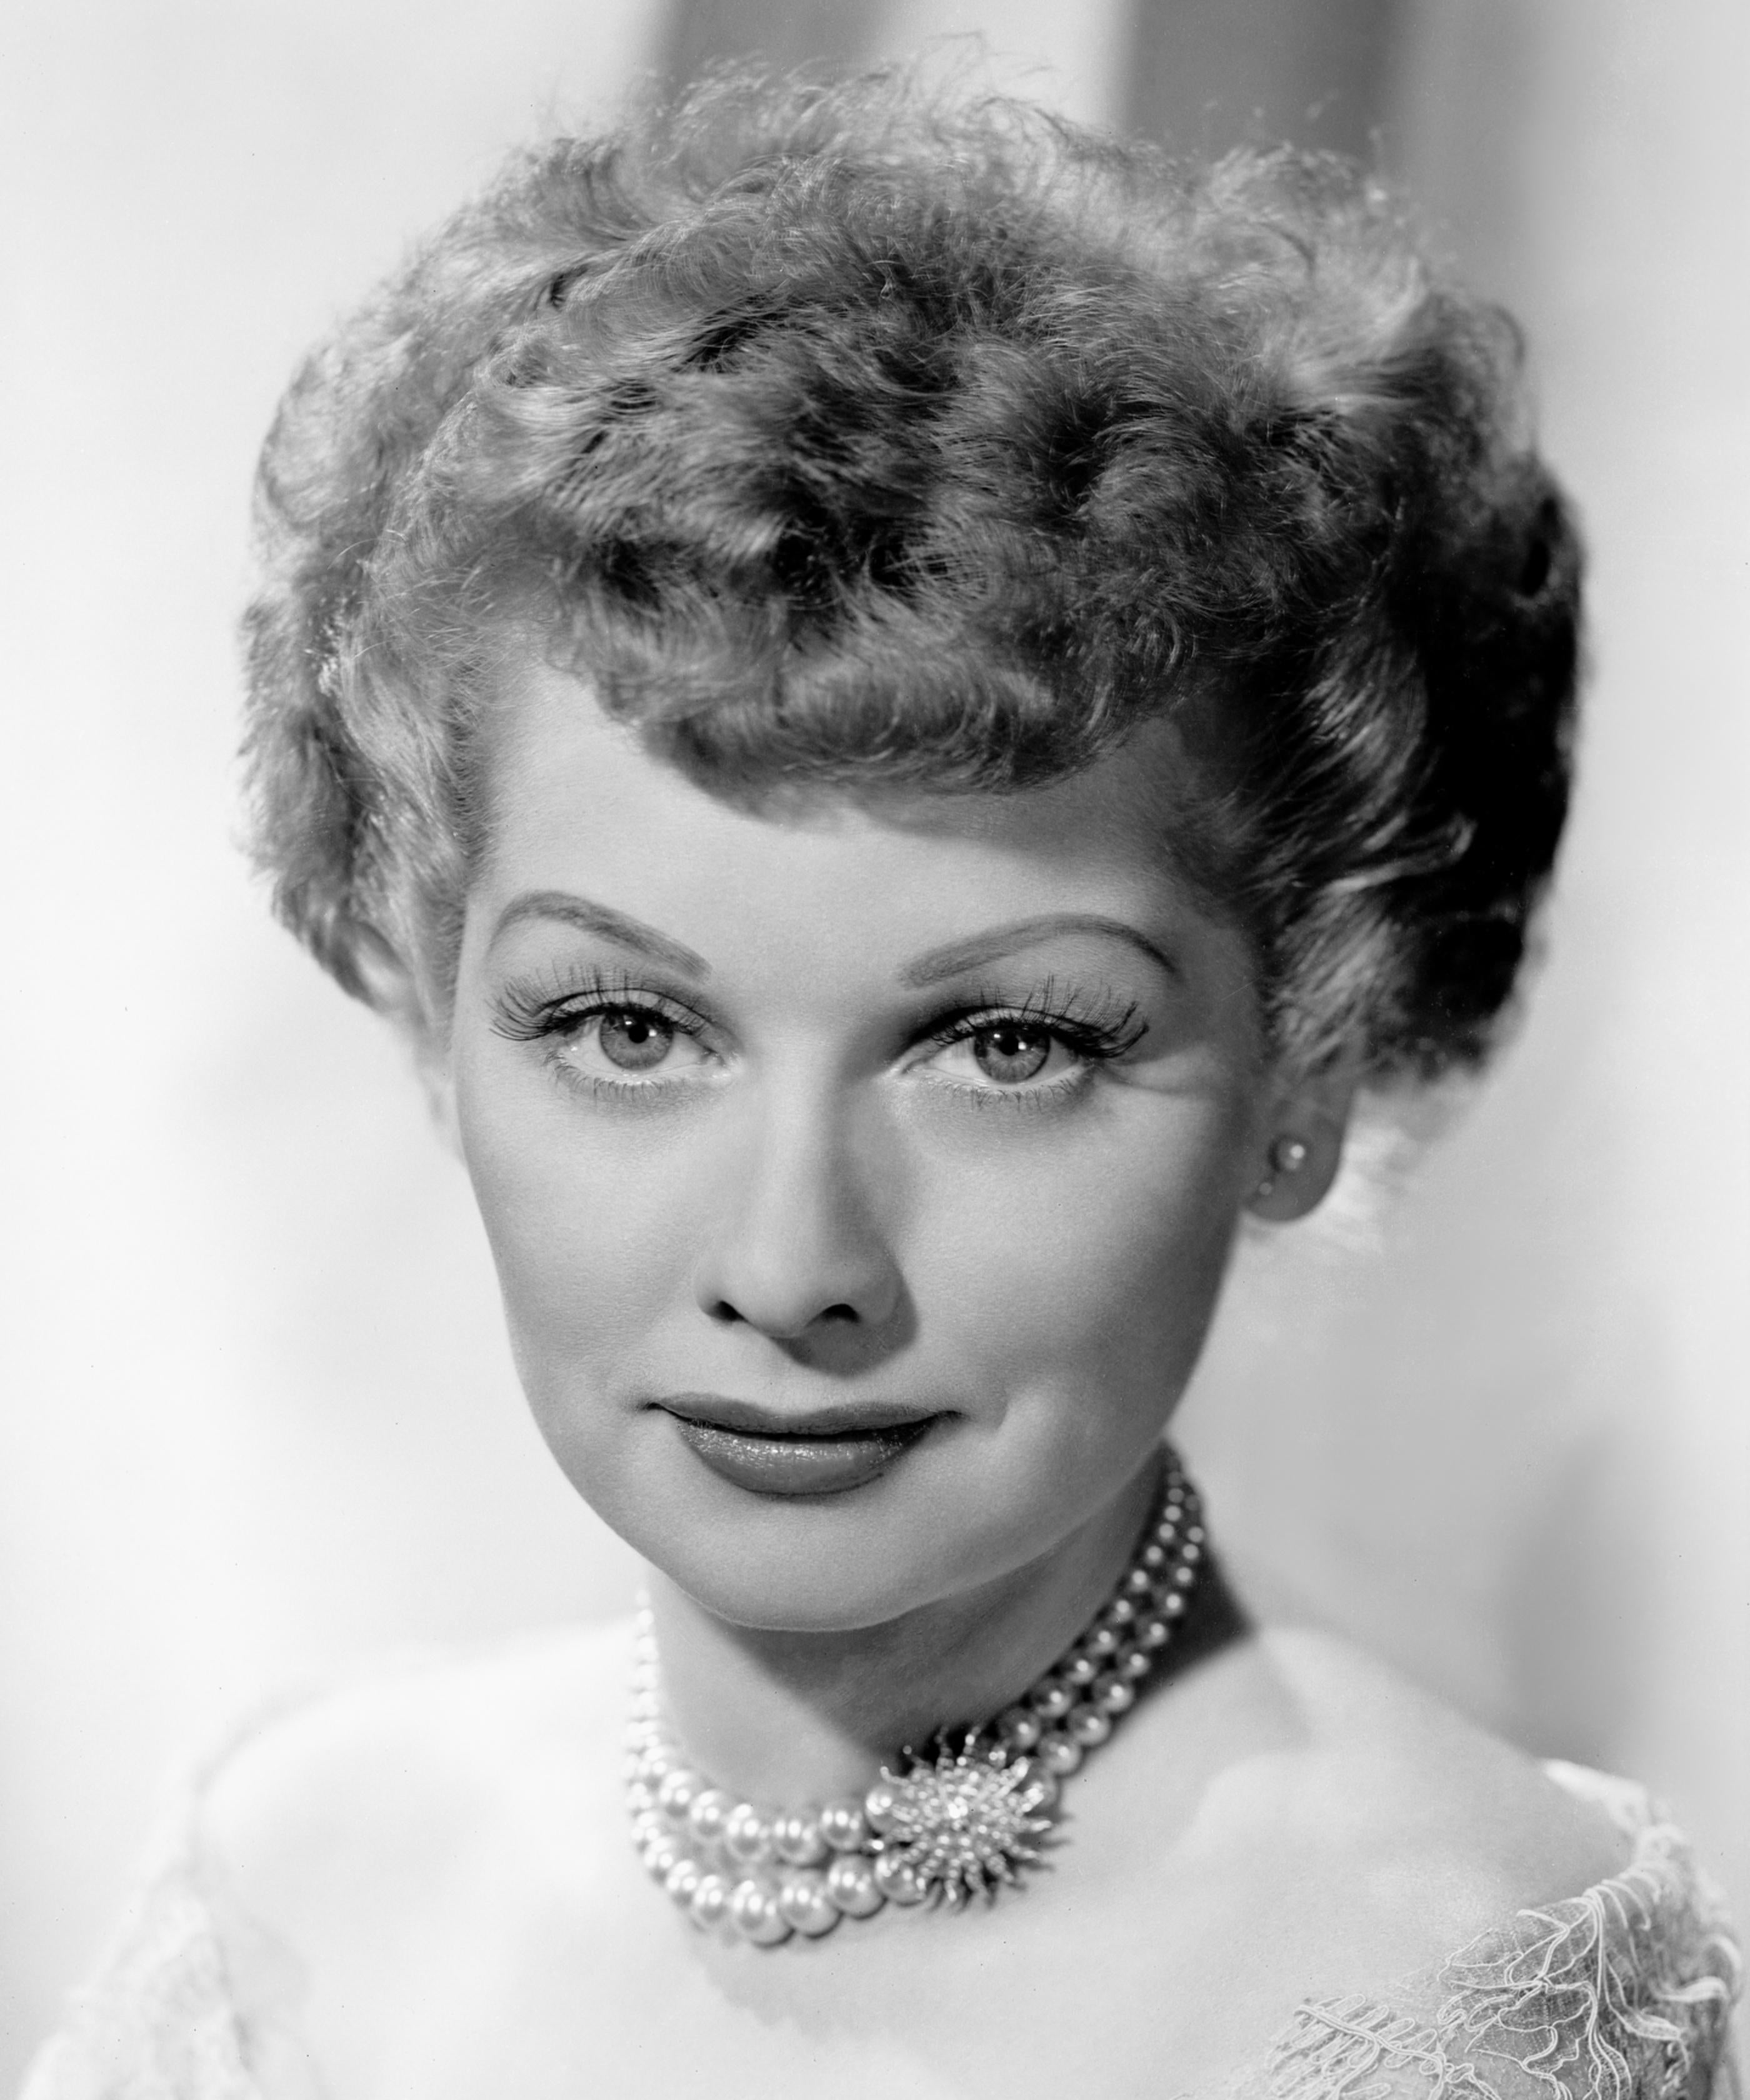 Unknown Portrait Photograph - Lucille Ball in Pearls